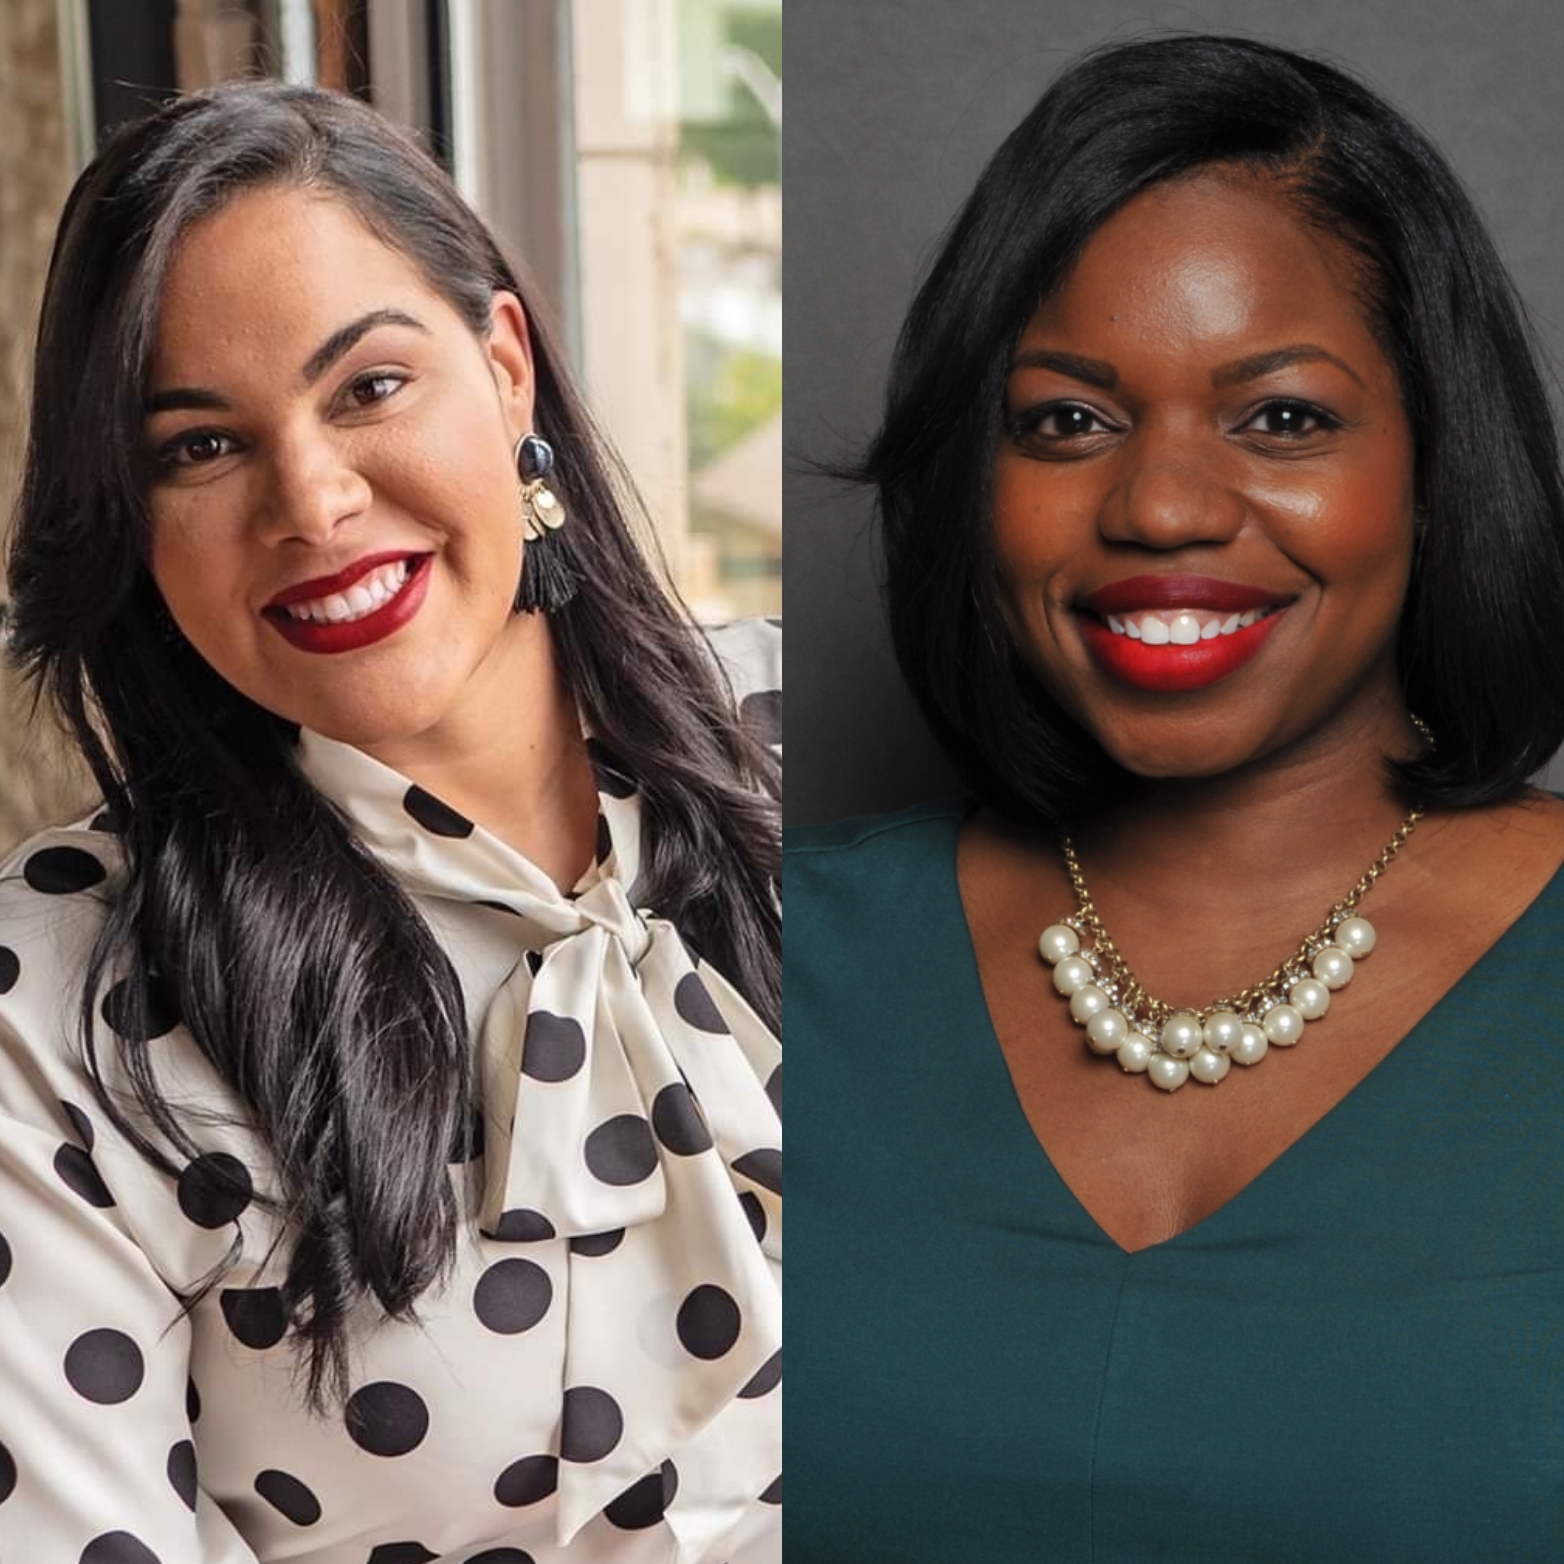 Affinity Welcomes New Board Members: Jatnna + Veronica